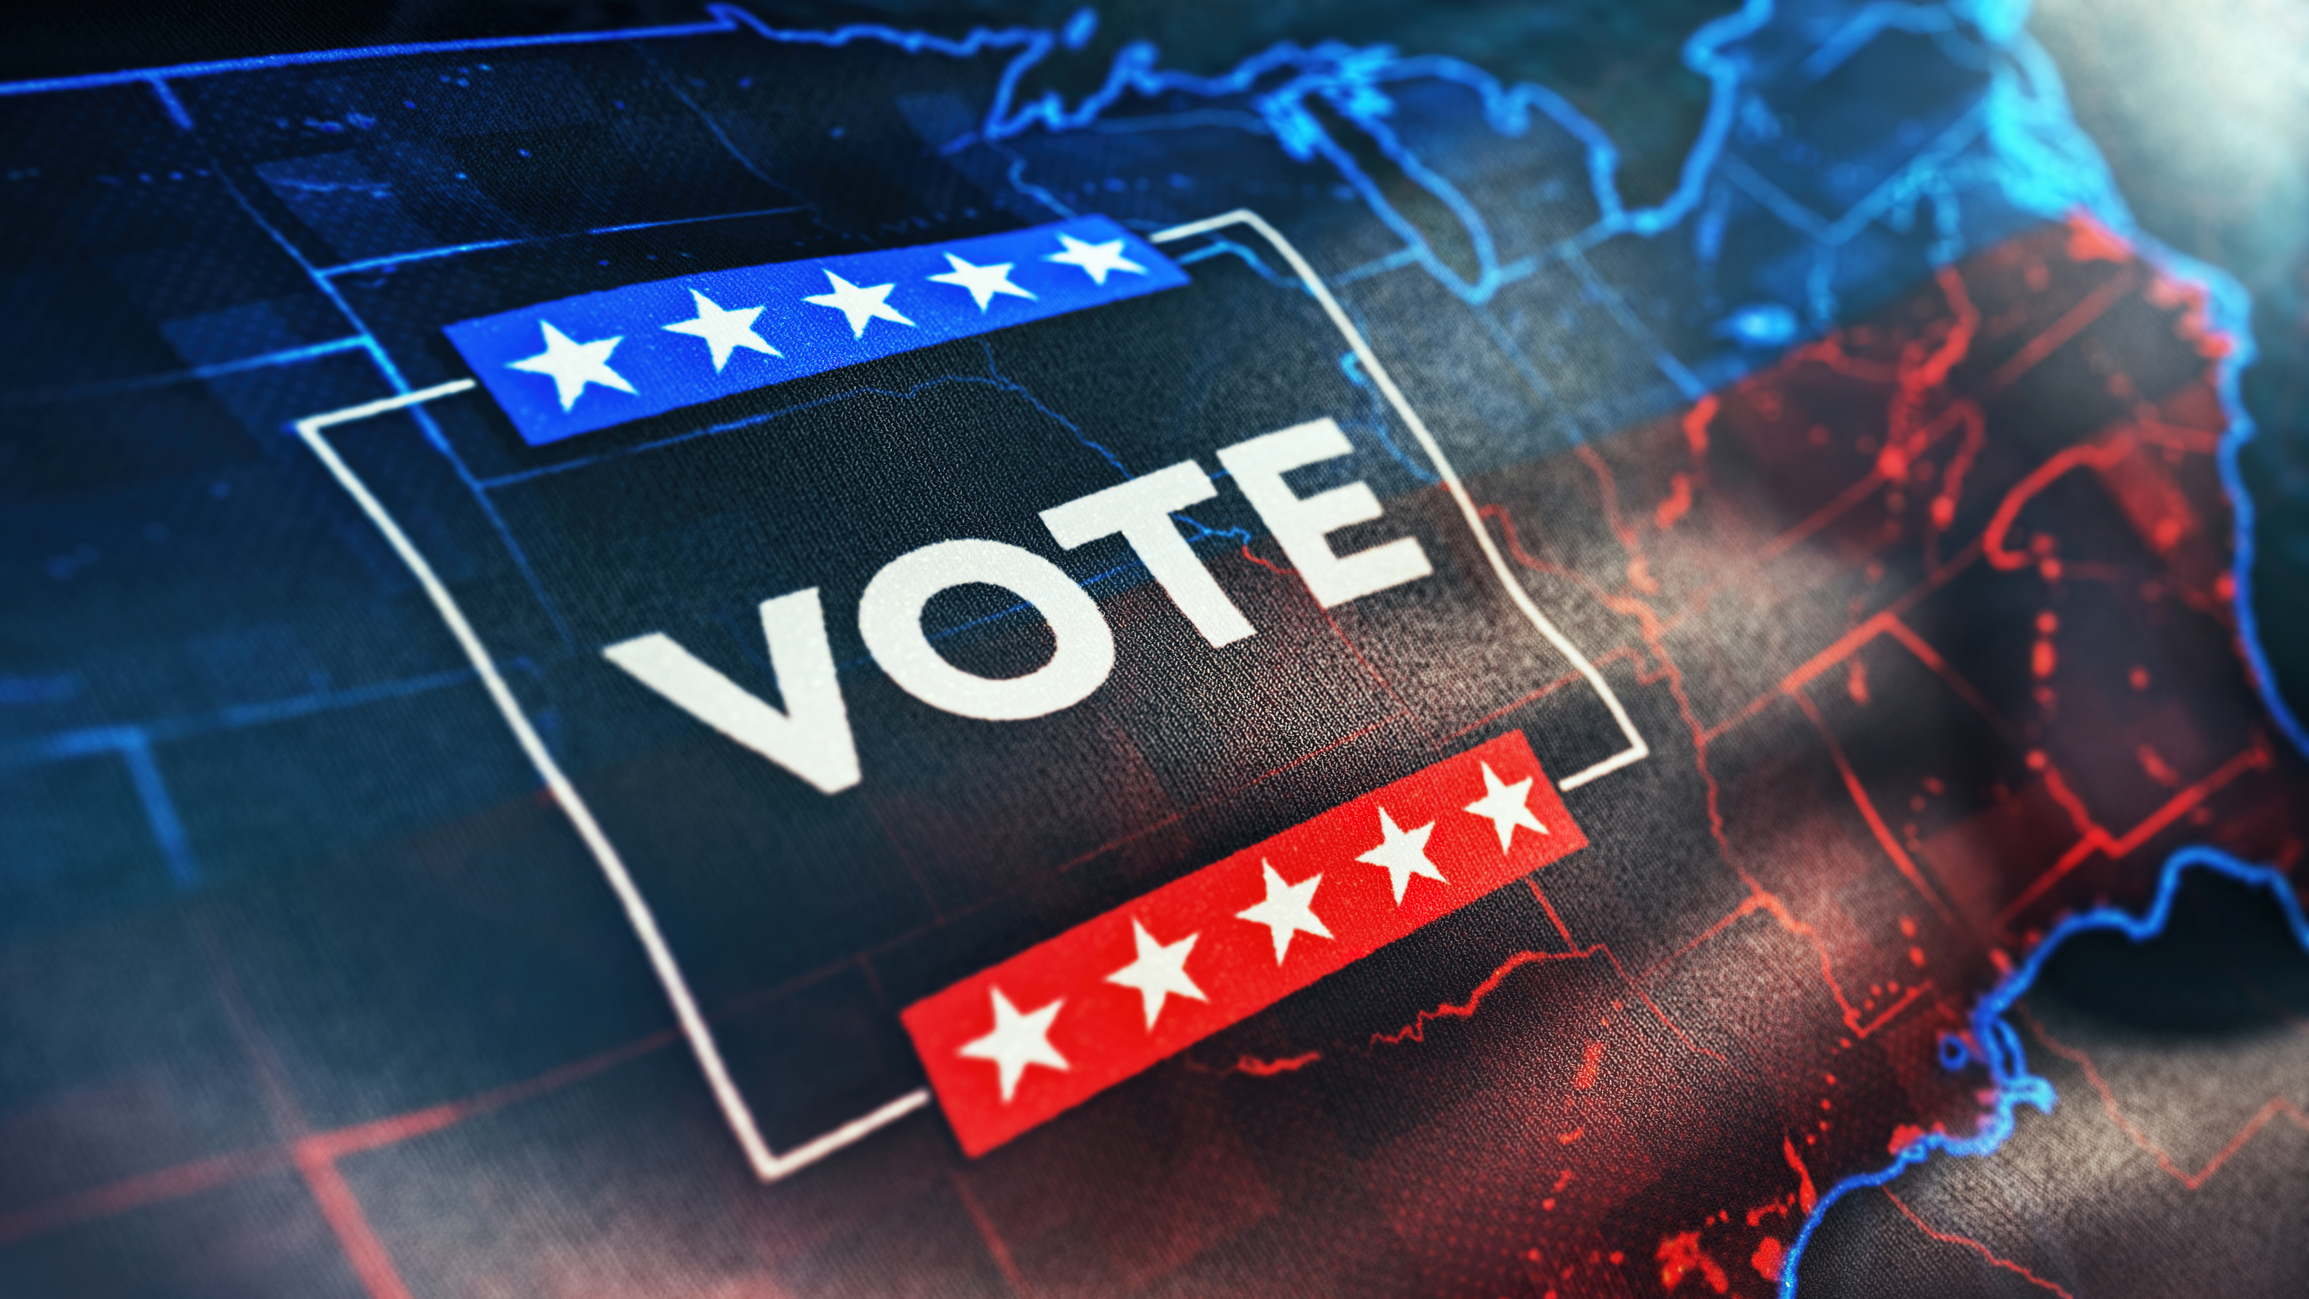 Illustration with red, white and blue "vote" sign